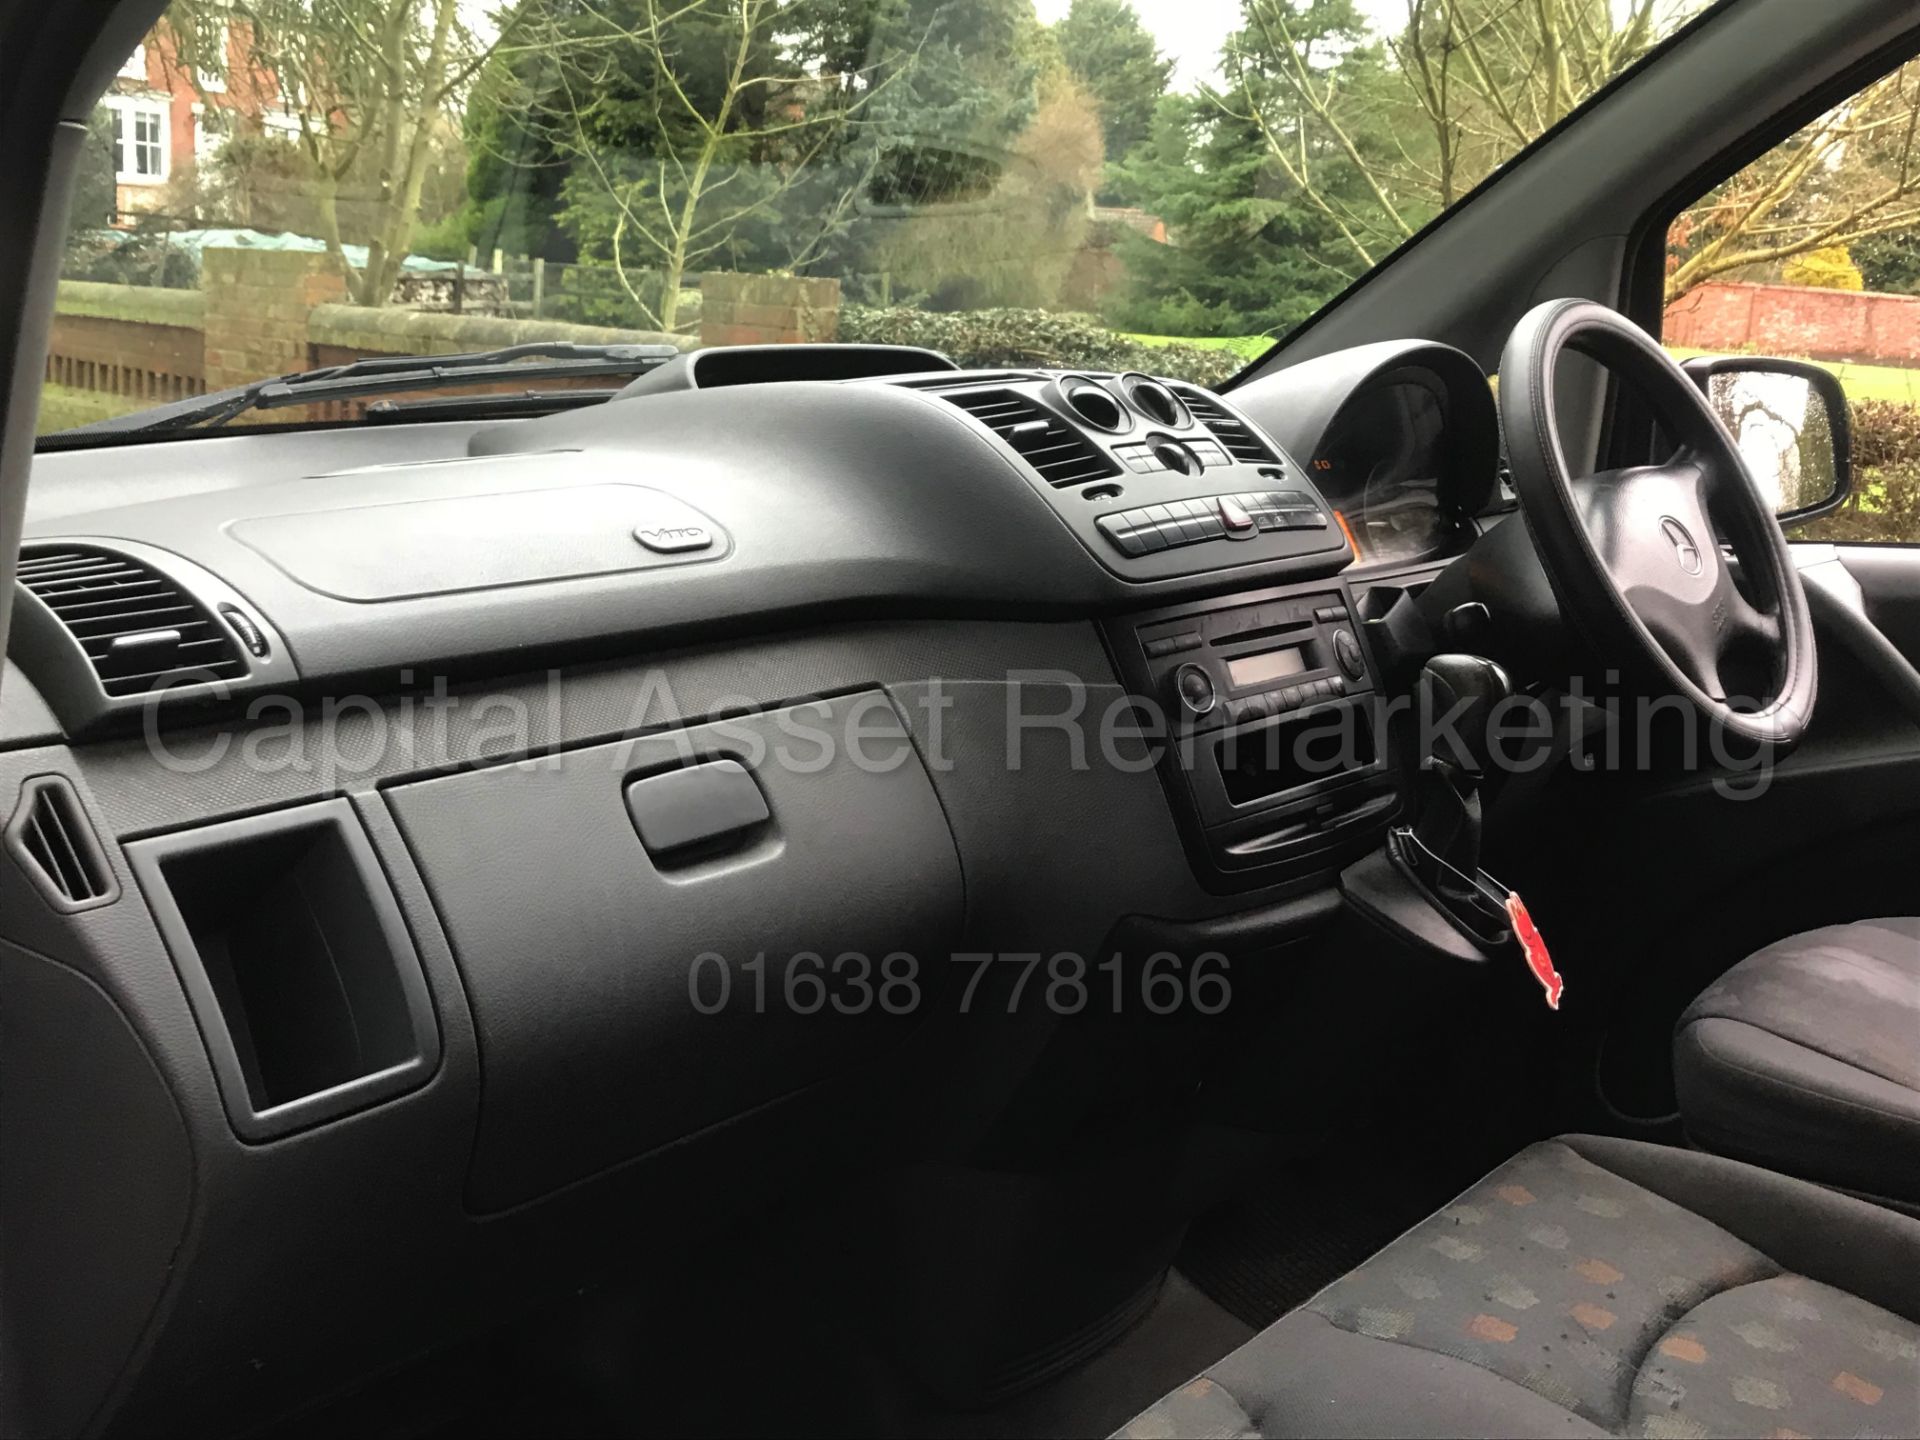 MERCEDES VITO CDI "115BHP - AUTOMATIC" (2010 - 10 REG) SPORTY VAN - AIR CON - ELEC PACK - 1 OWNER !! - Image 12 of 25